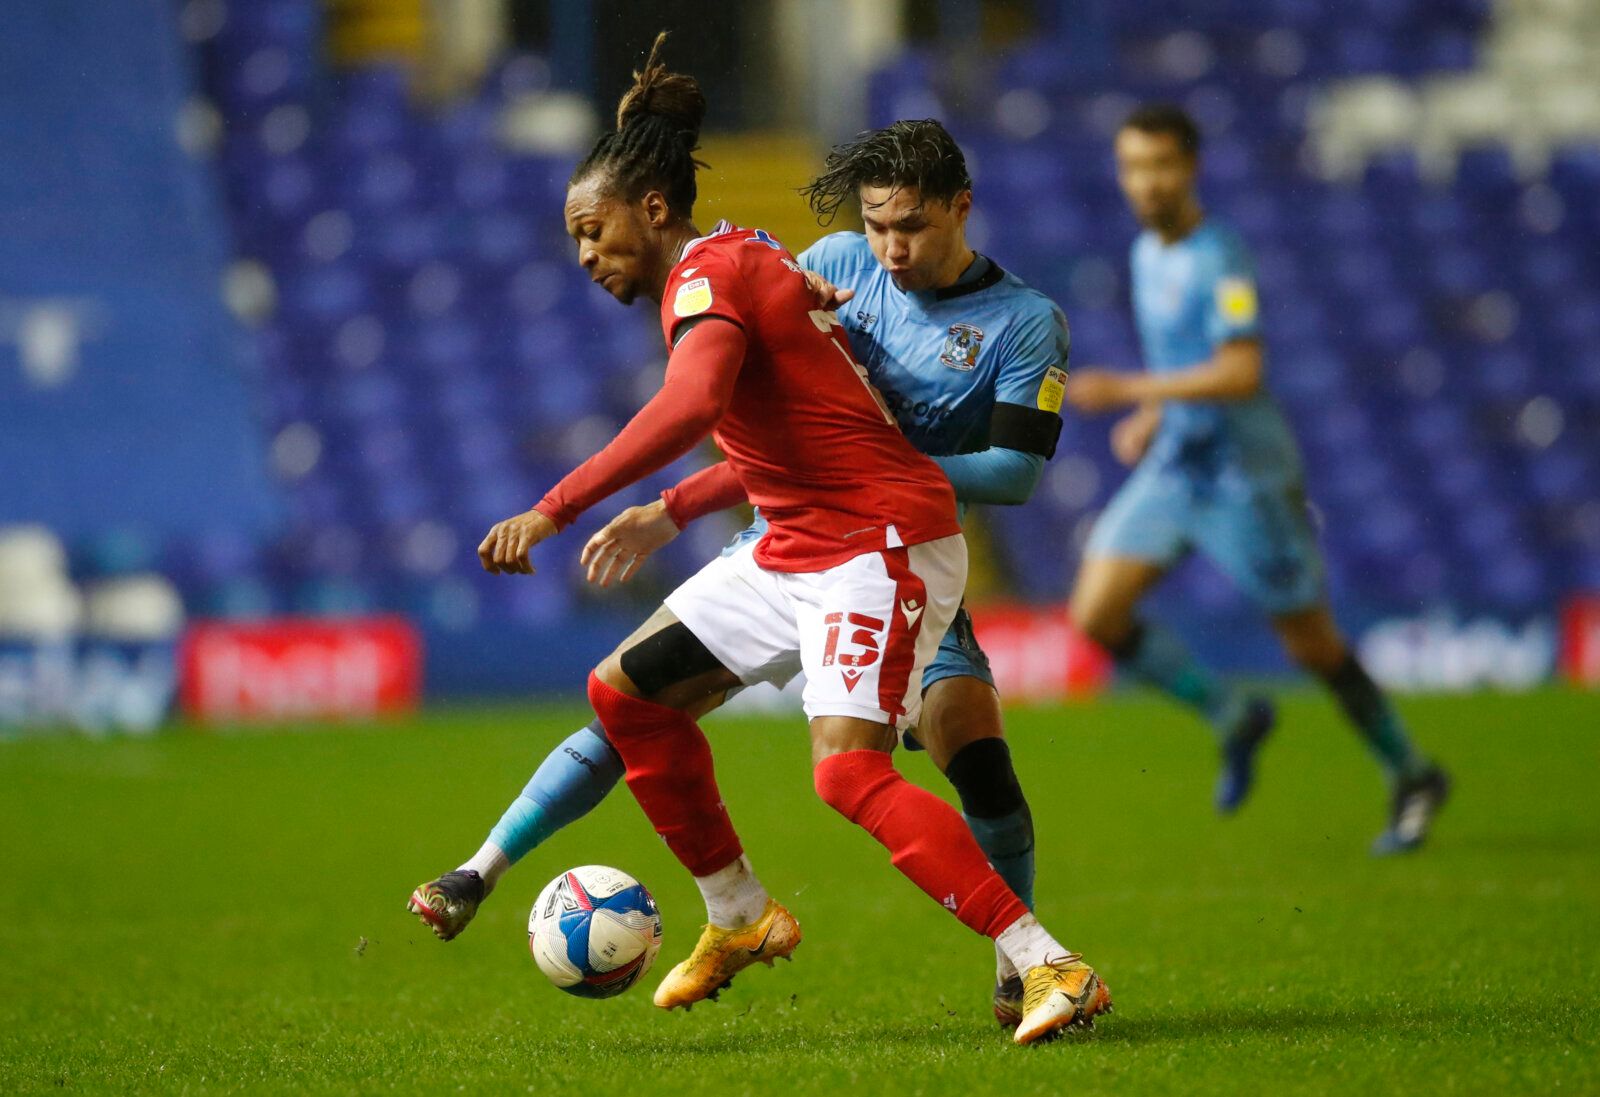 Soccer Football - Championship - Coventry City v Nottingham Forest - St Andrew's, Birmingham, Britain - February 2, 2021 Nottingham Forest's Gaetan Bong in action with Coventry City's Callum O'Hare Action Images/Andrew Boyers EDITORIAL USE ONLY. No use with unauthorized audio, video, data, fixture lists, club/league logos or 'live' services. Online in-match use limited to 75 images, no video emulation. No use in betting, games or single club /league/player publications.  Please contact your acco